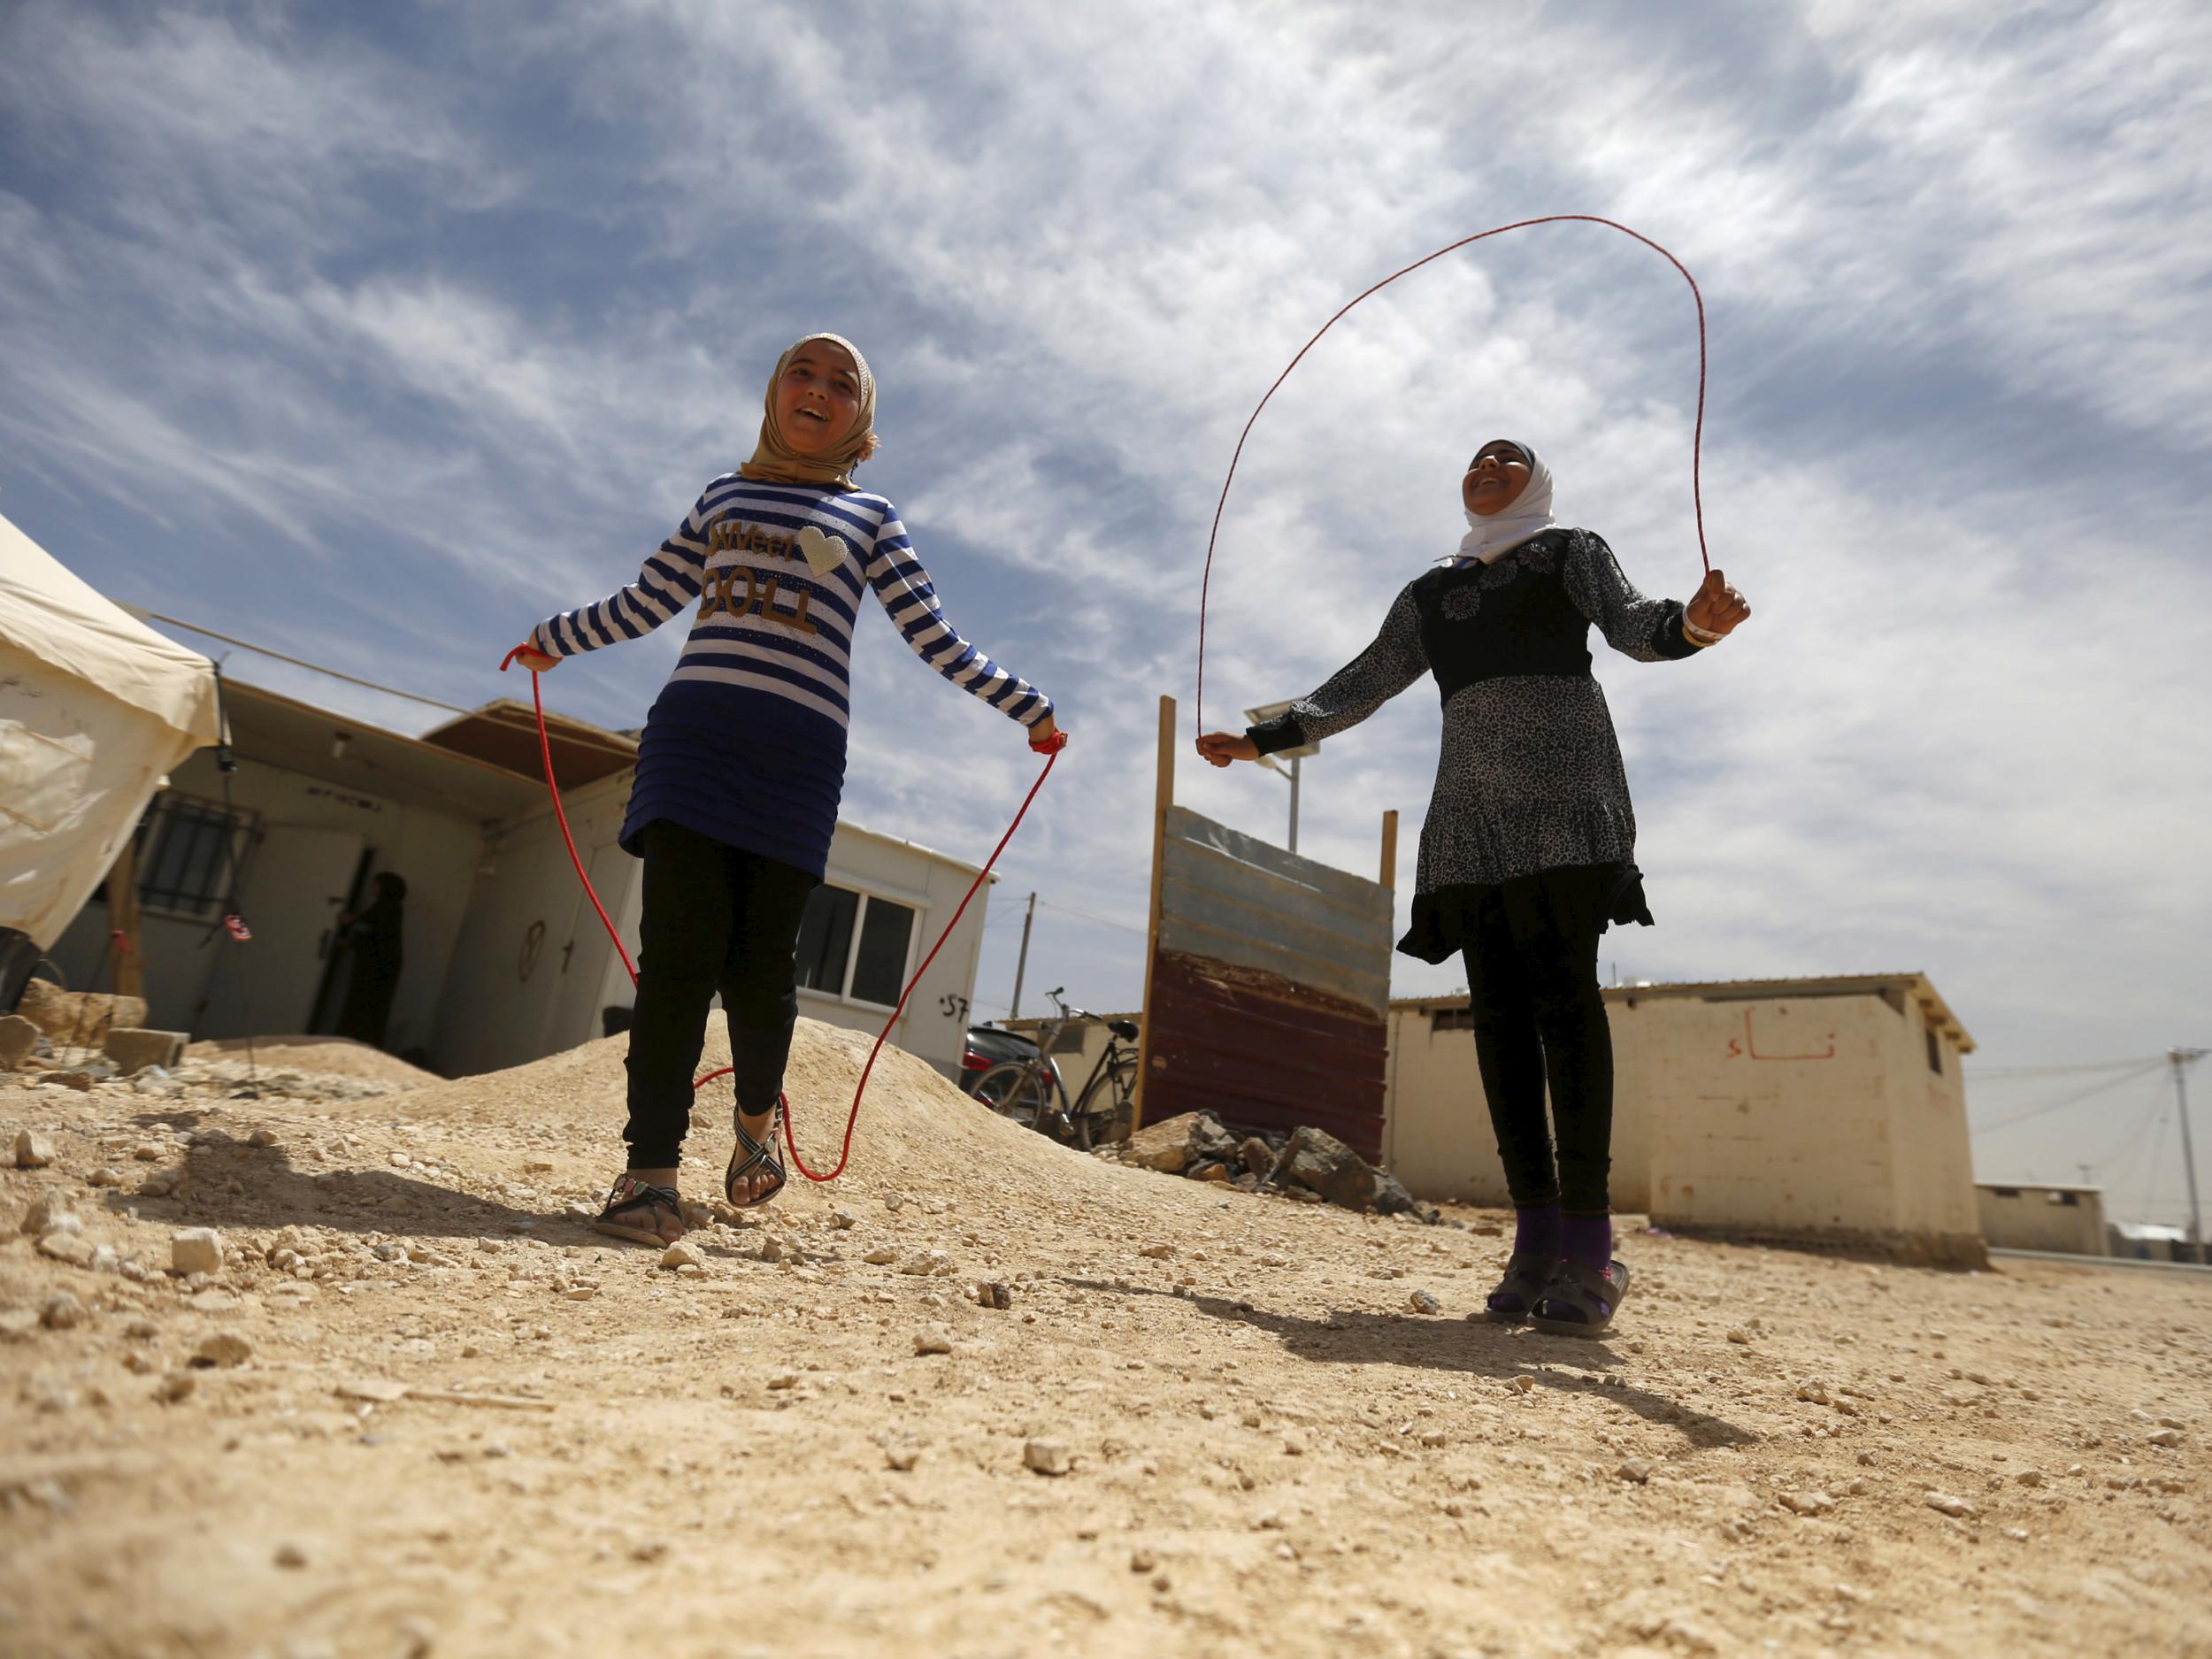 Syrian refugee Omayma al Hushan (left), 14, who launched an initiative against child marriage among refugees, plays with her friend outside their residence in Al Zaatari camp in the Jordanian city of Mafraq